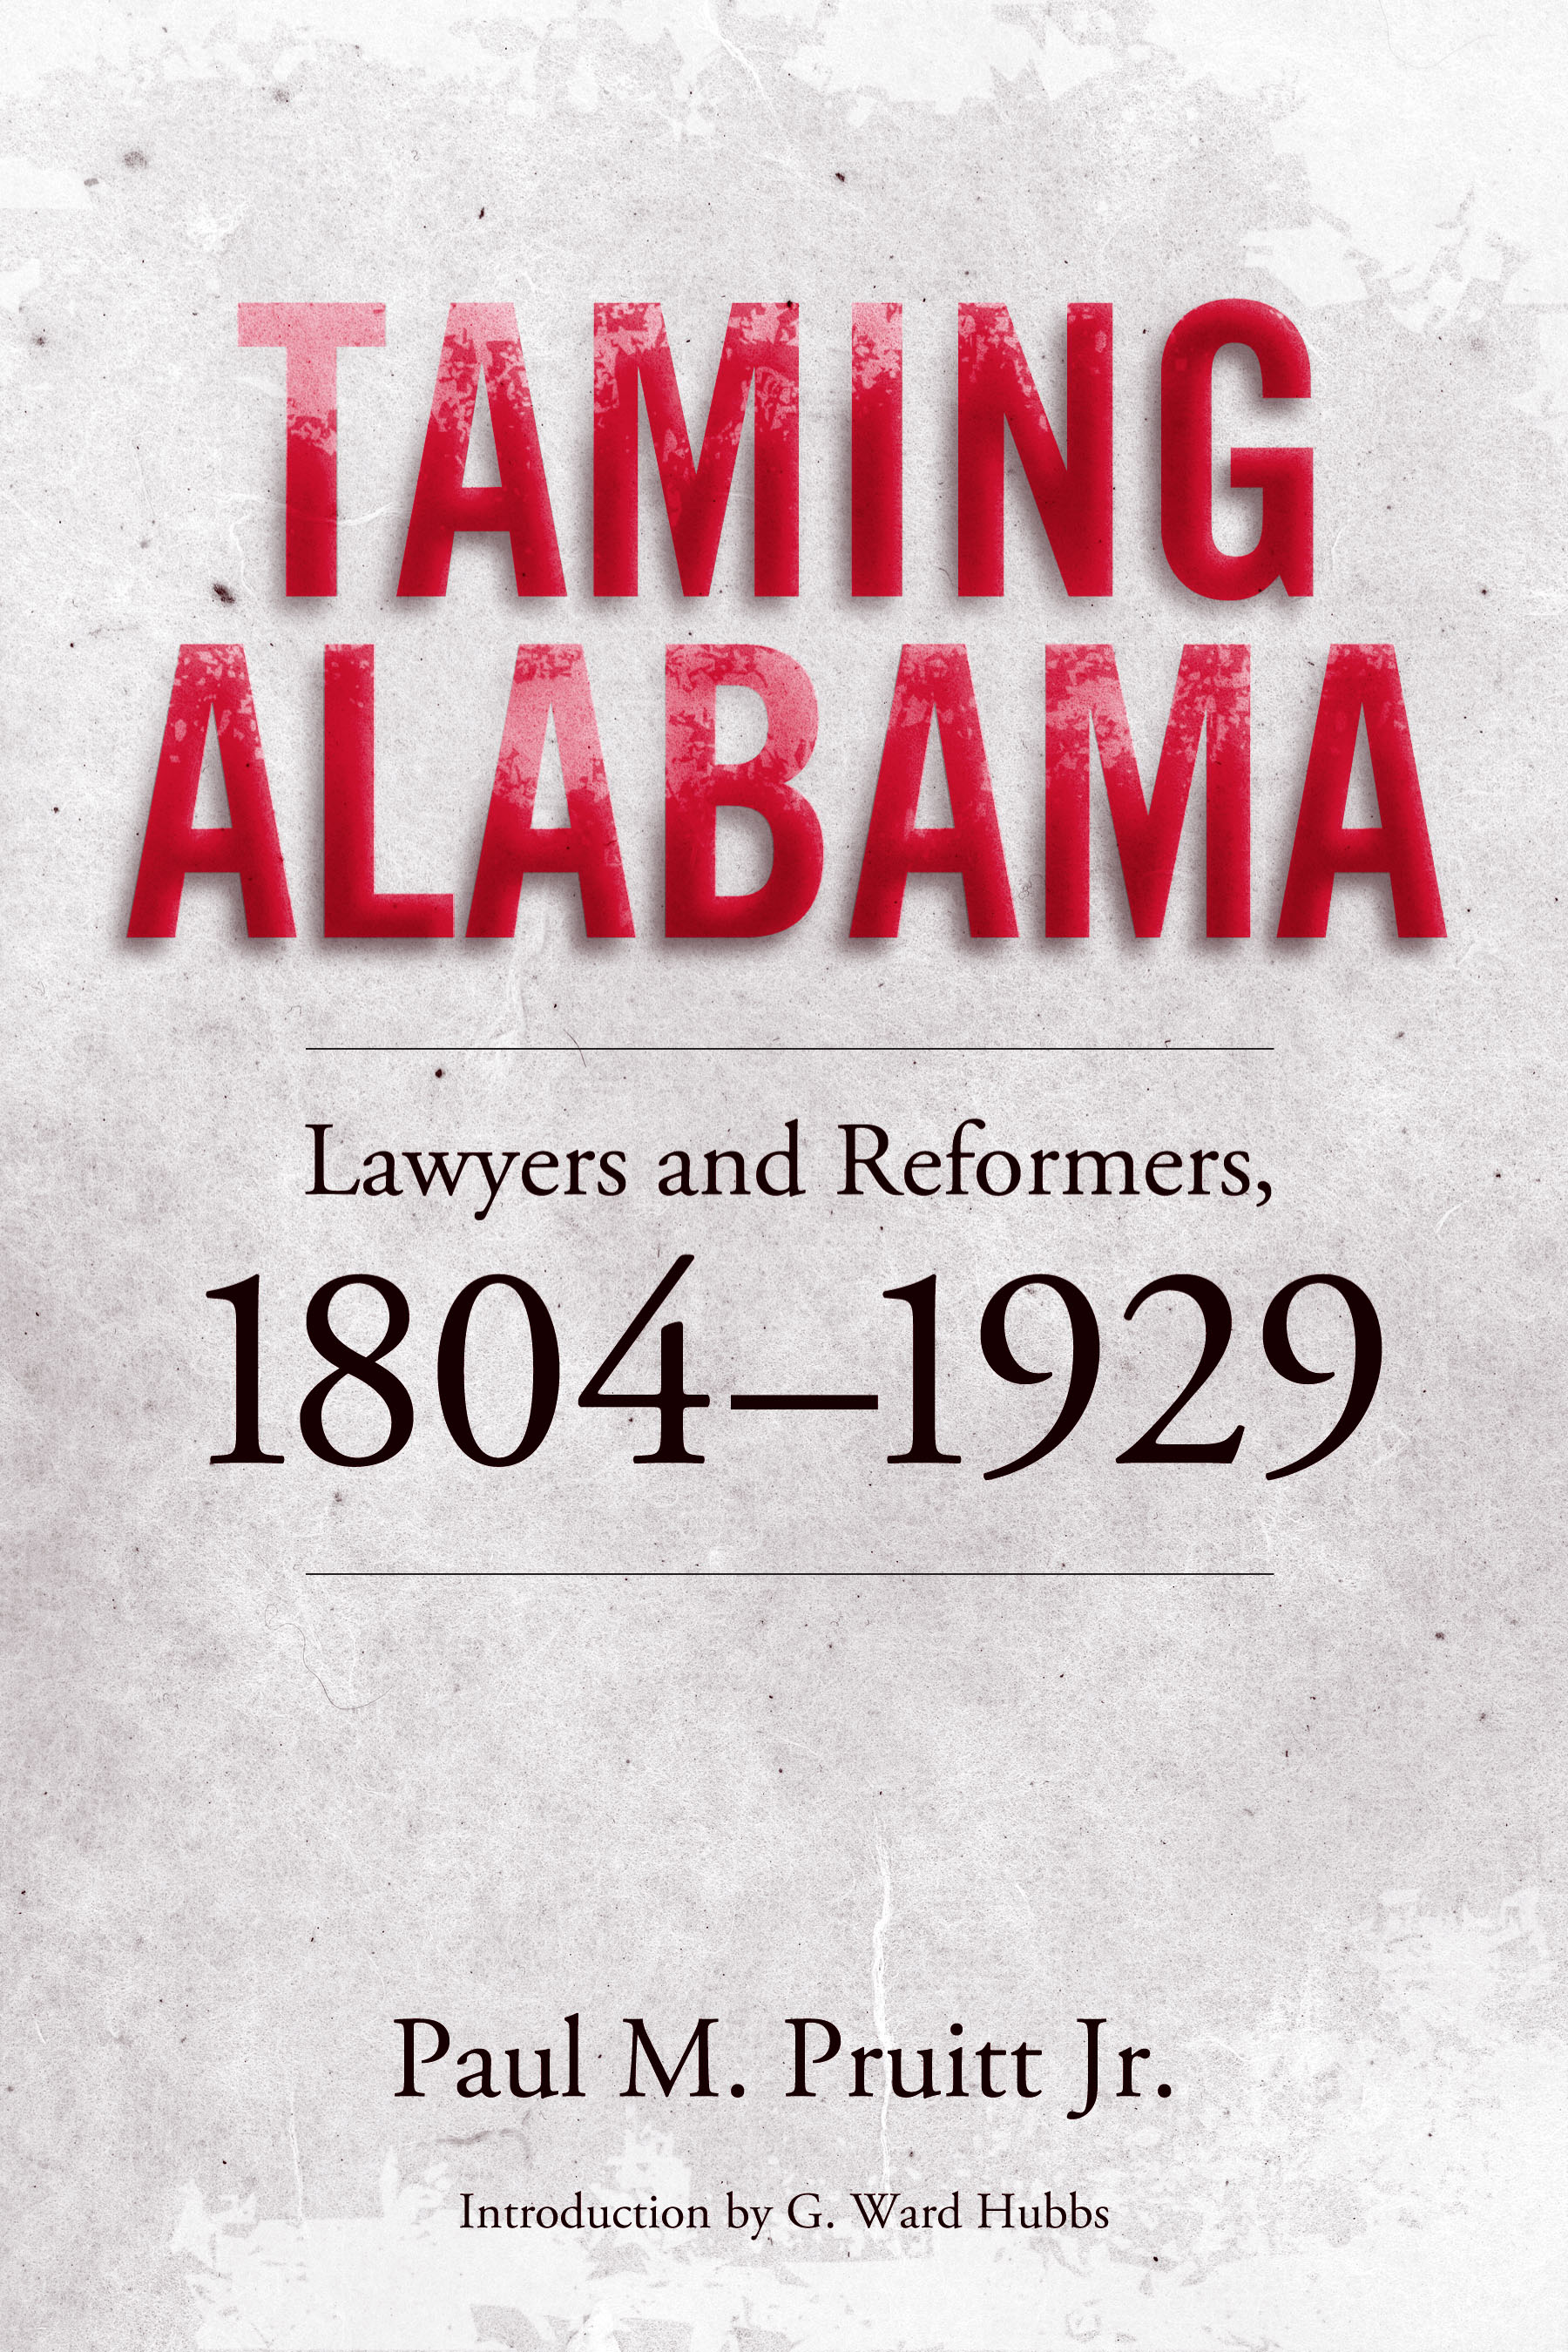 Taming Alabama: Lawyers and Reformers, 1804-1929 Paul M. Pruitt